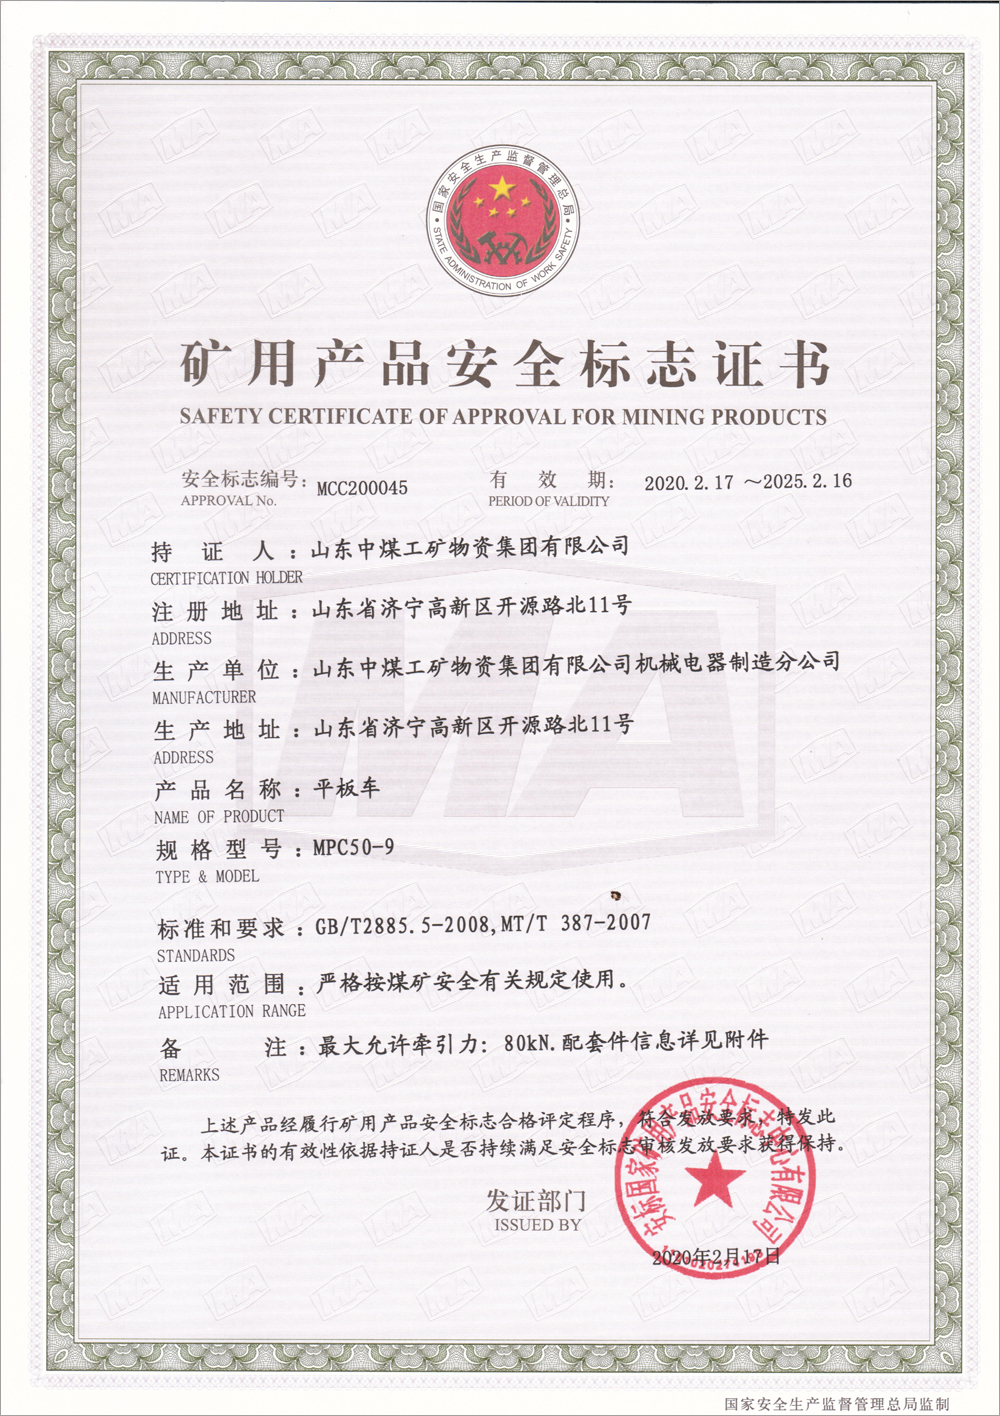 Warm Congratulations To China Coal Group For Adding Another 9 National Mining Product Safety Logo Certificates